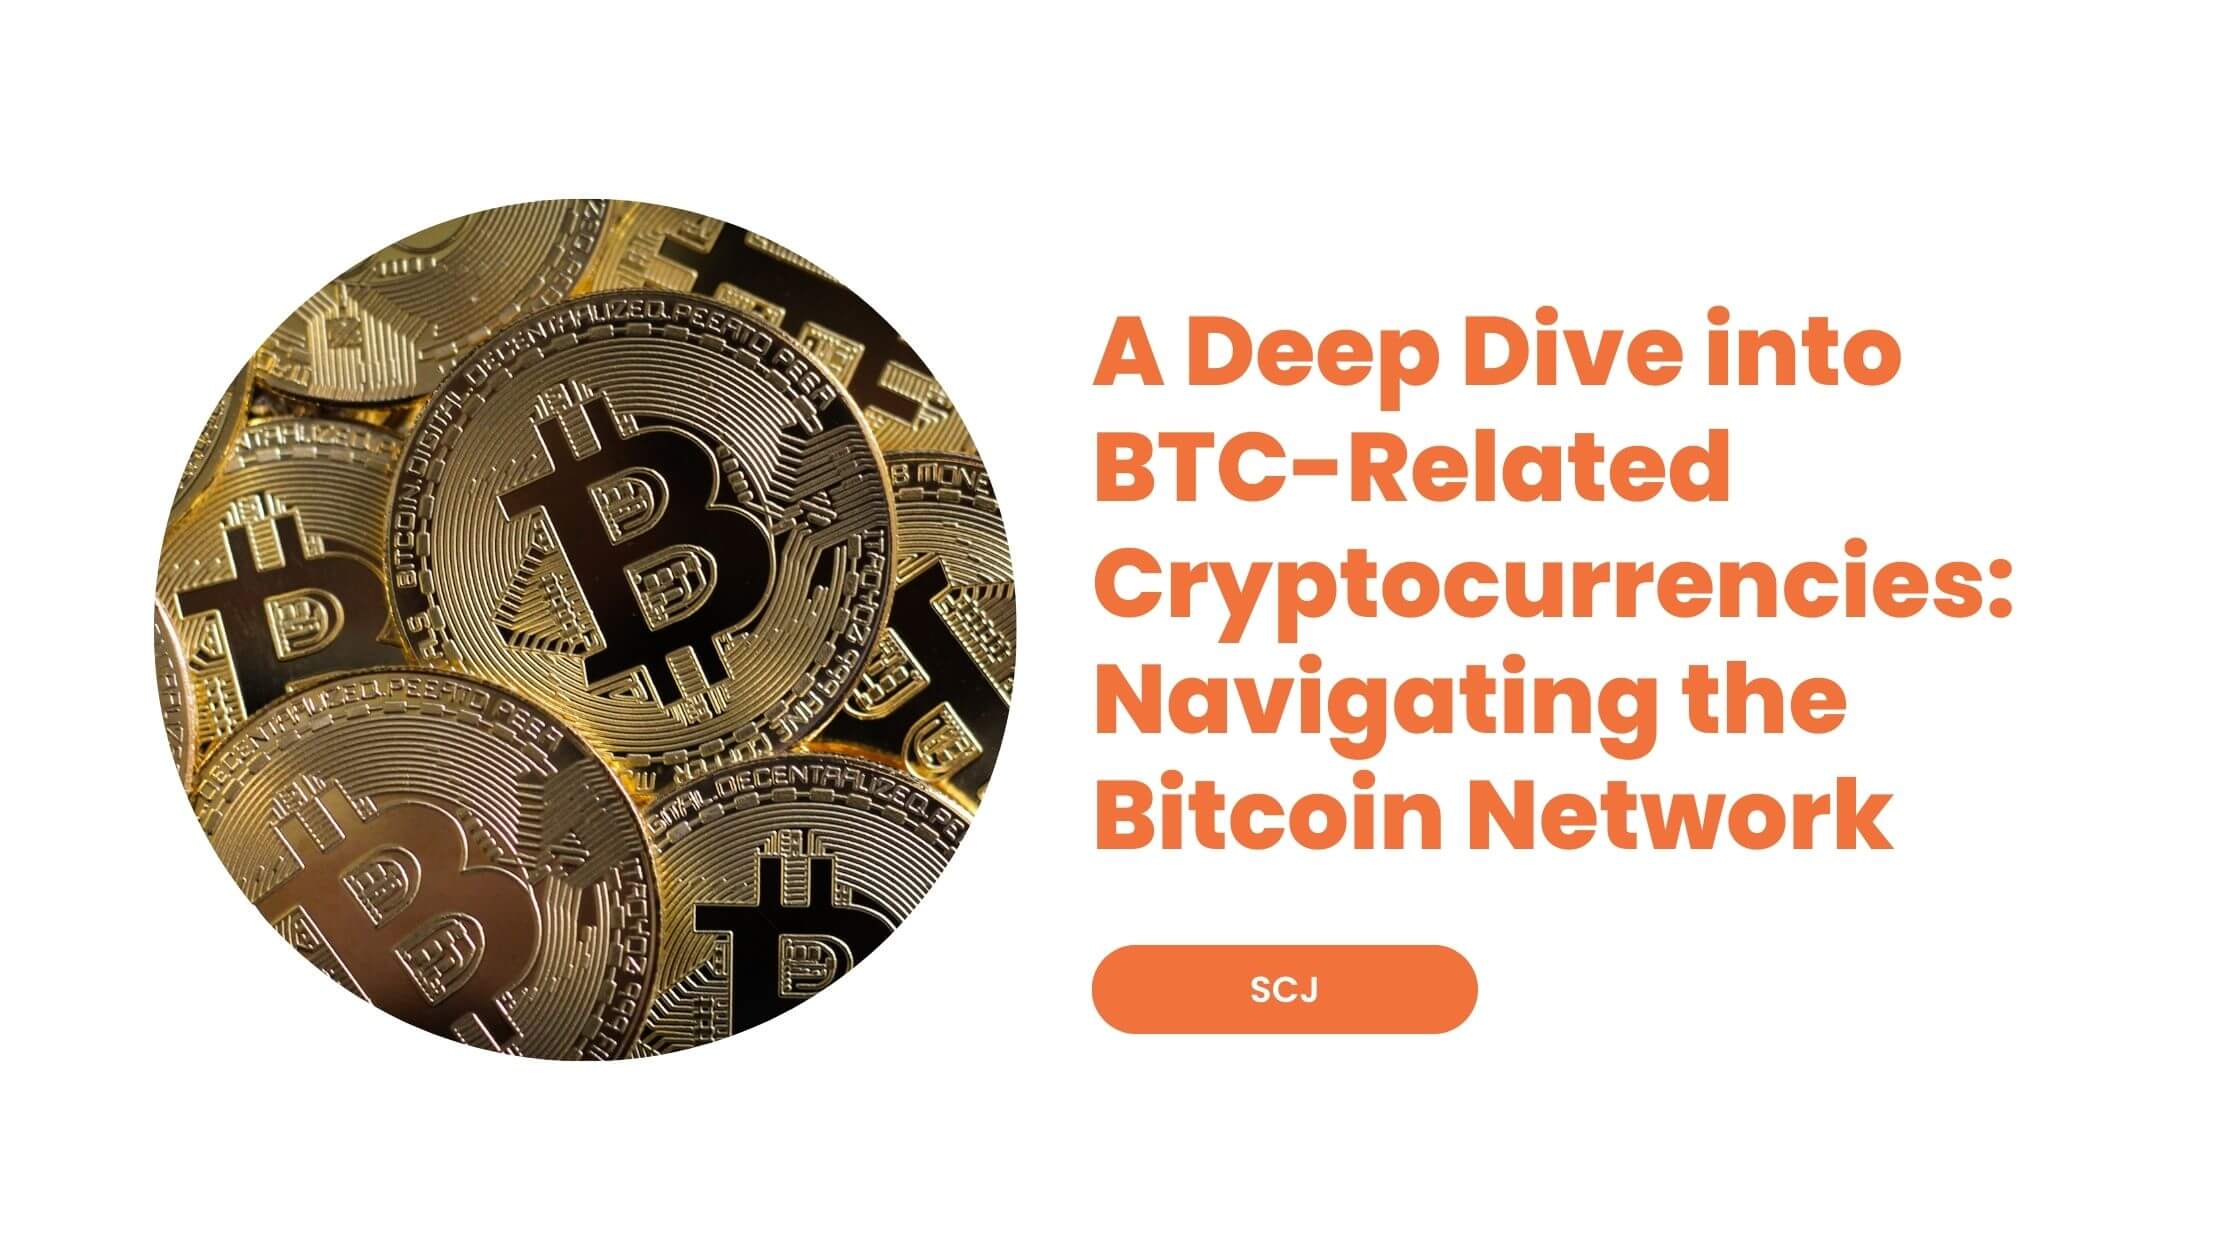 A Deep Dive into BTC-Related Cryptocurrencies Navigating the Bitcoin Network